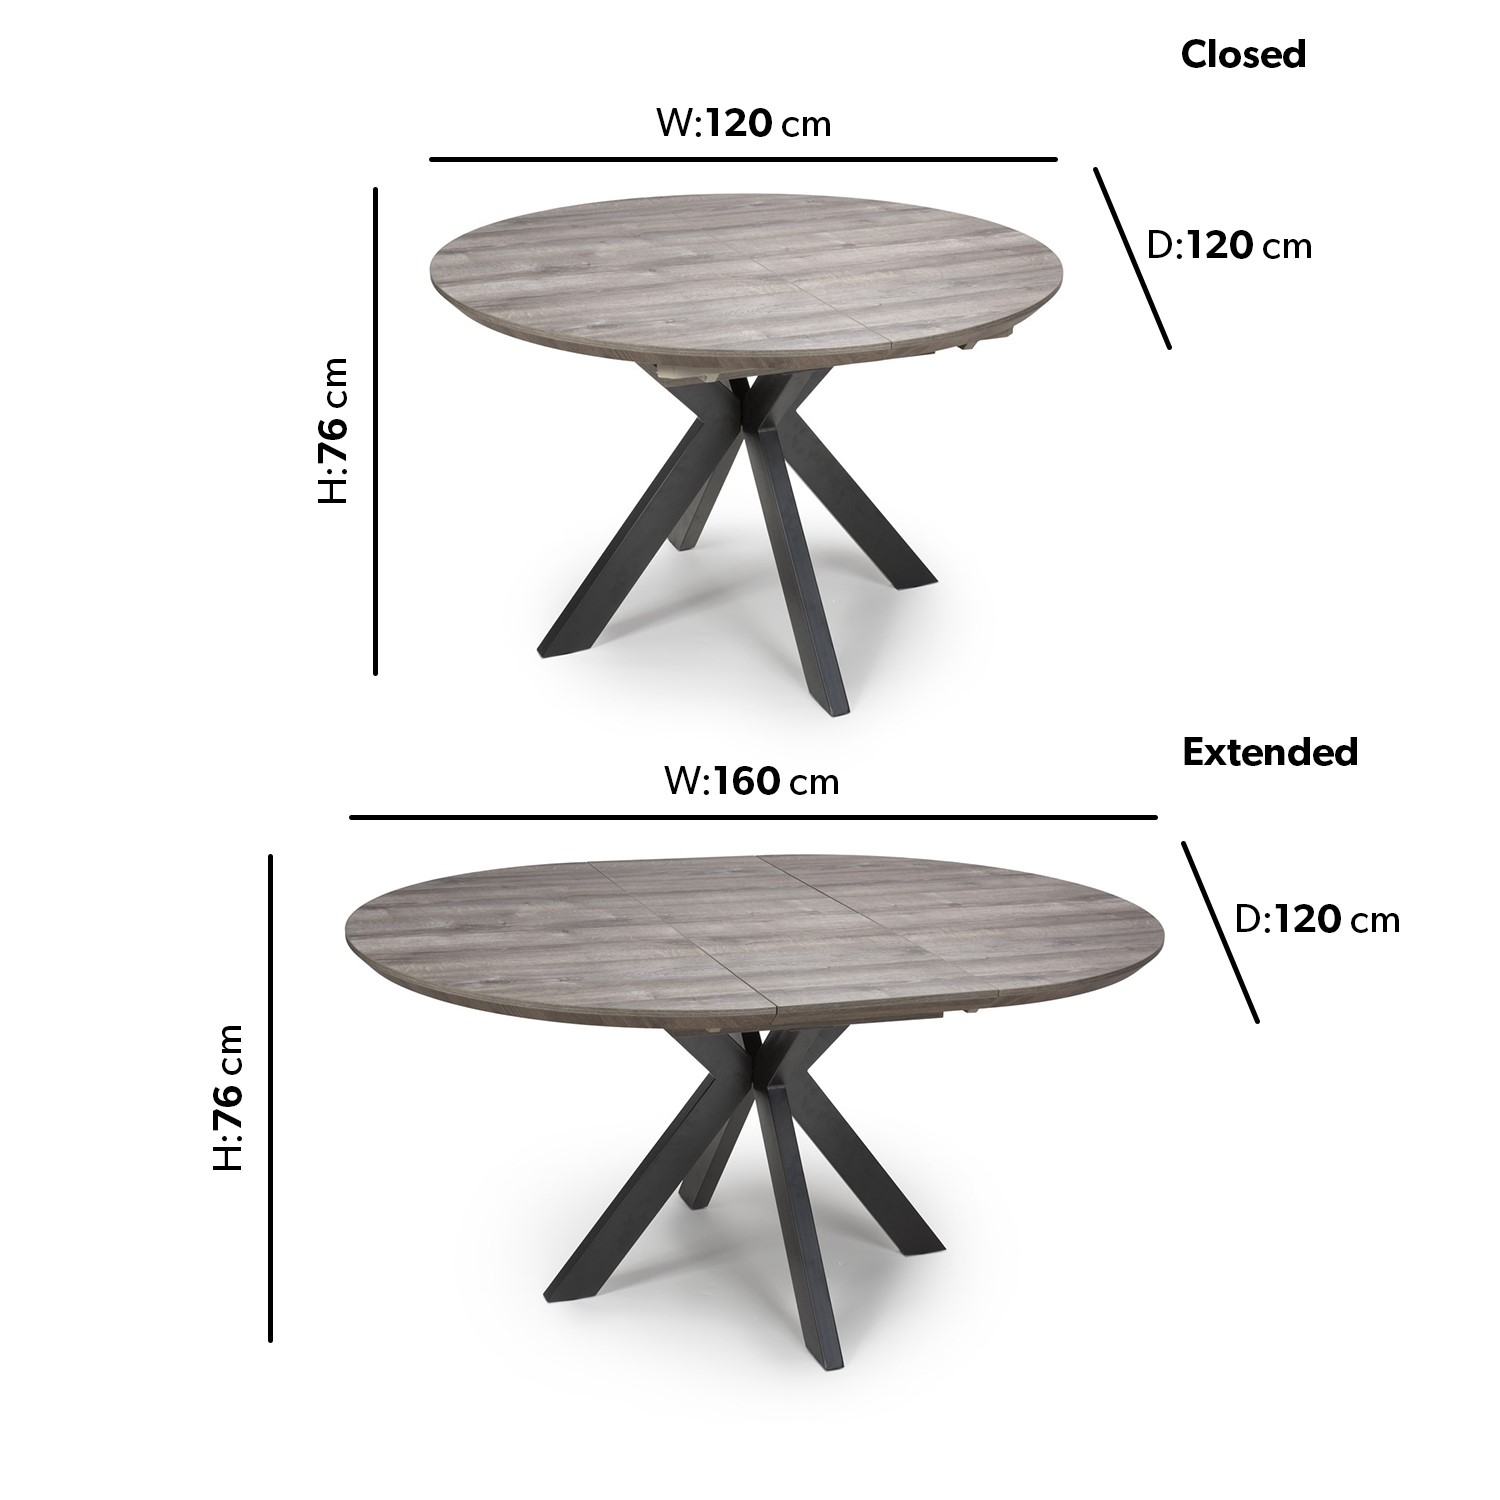 Read more about Grey wood effect round extendable dining table seats 4-6 manhattan